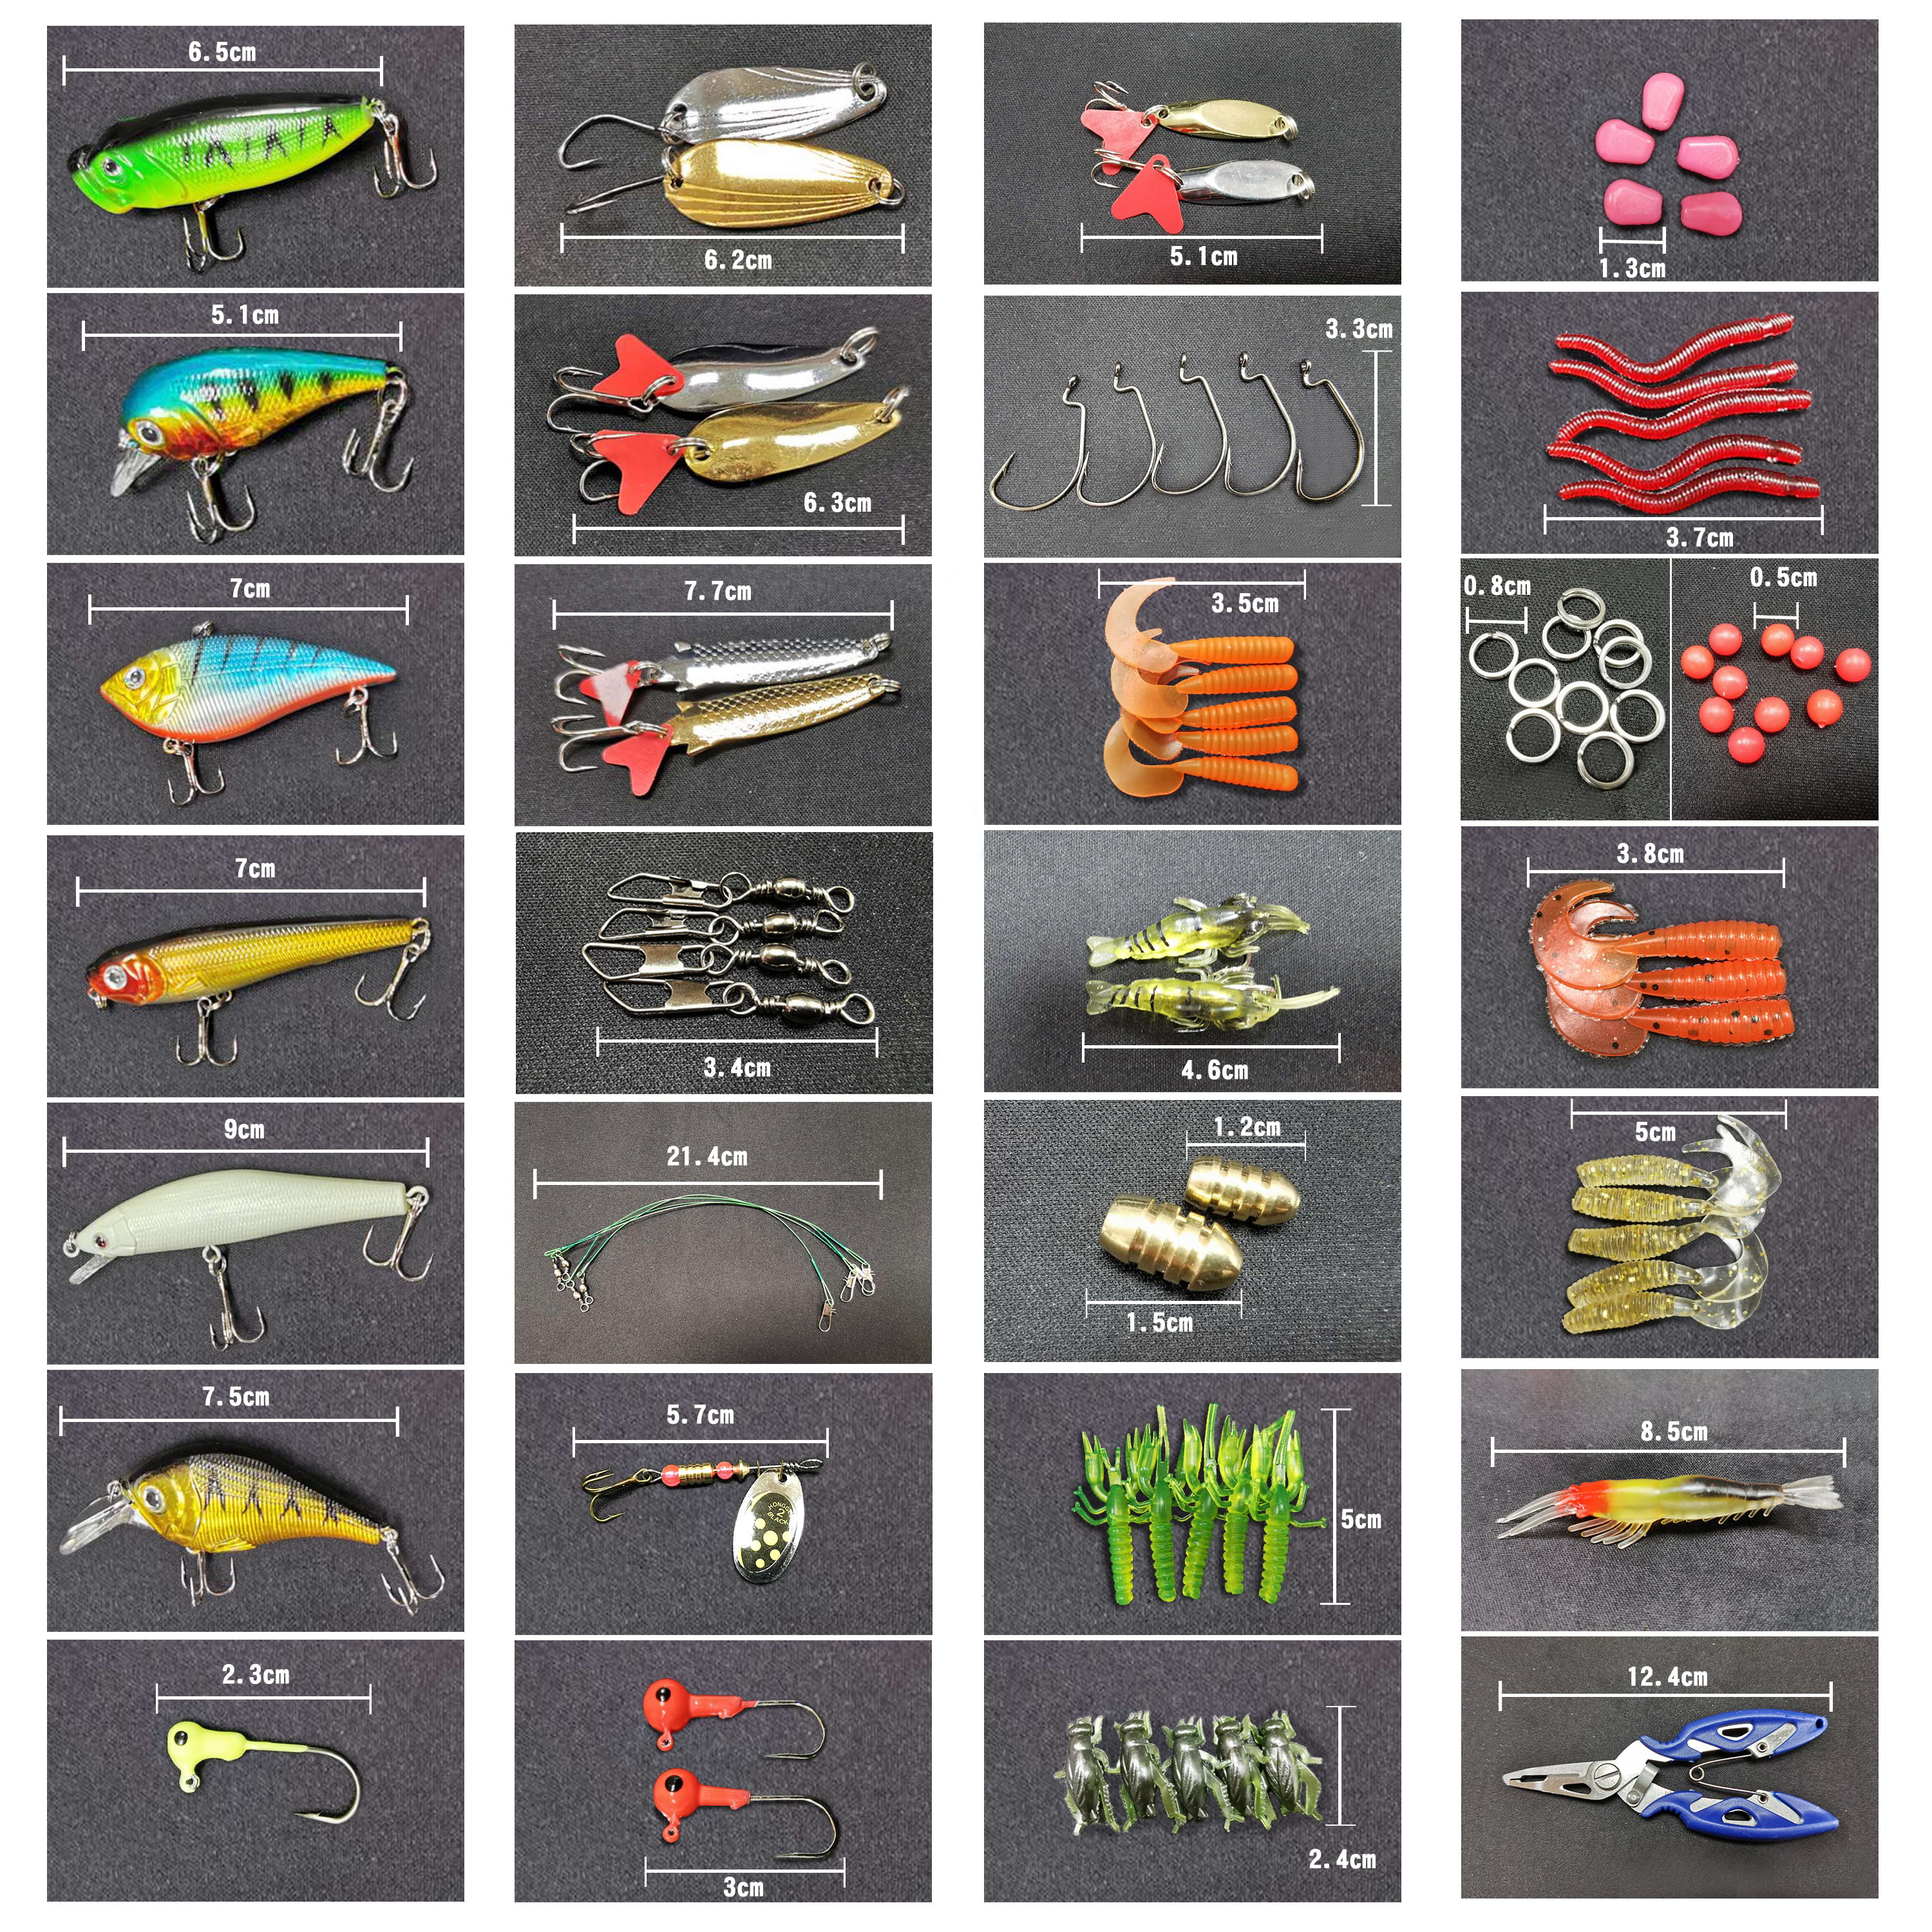 WDG 85Pcs Fishing Lures Kit, Bass Trout Fishing Baits Accessories Including  Lures Hook, Plastic Worms, Crank Bait, Top Water Lures, Fishing Pliers  Scissors Set 